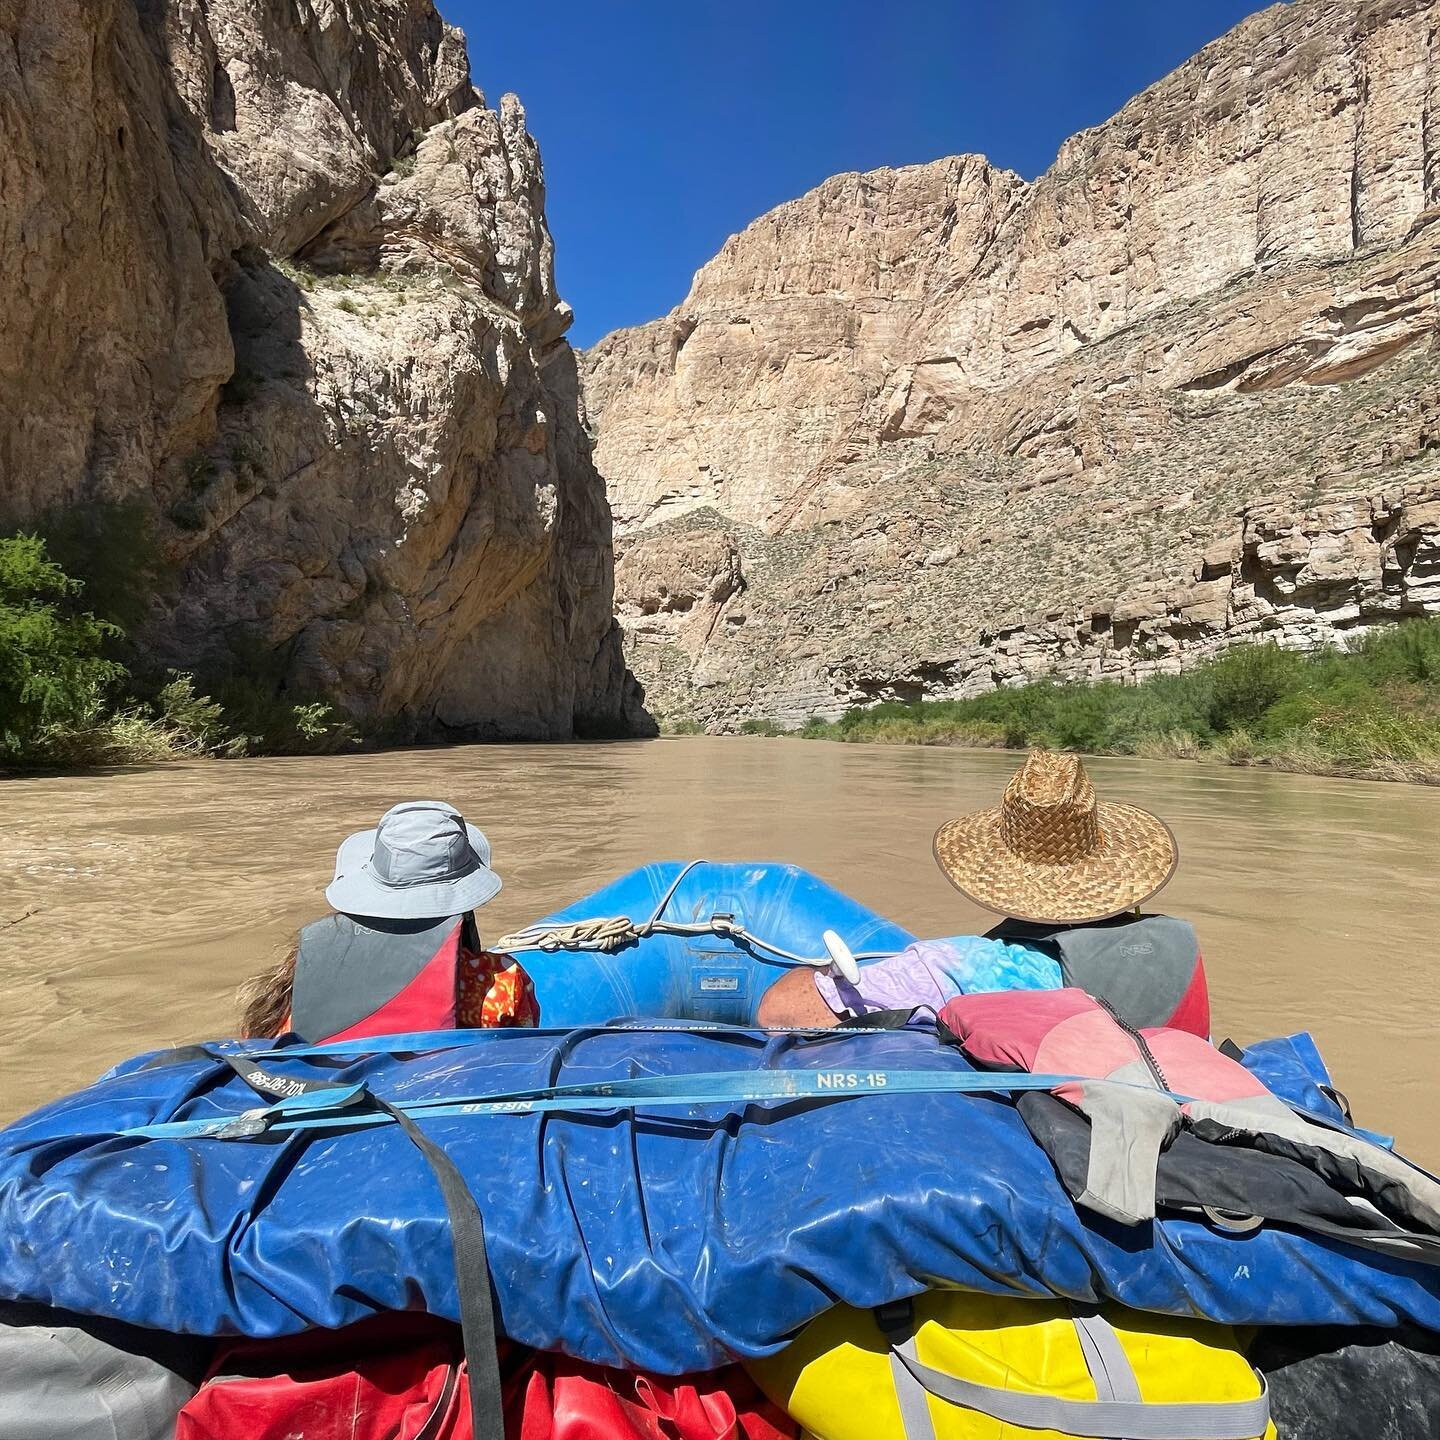 Getting to a point of no return on a big river trip is exactly what the doctor ordered.

#boquillascanyon #riogrande #texas #mexico #rafting #oarrafting